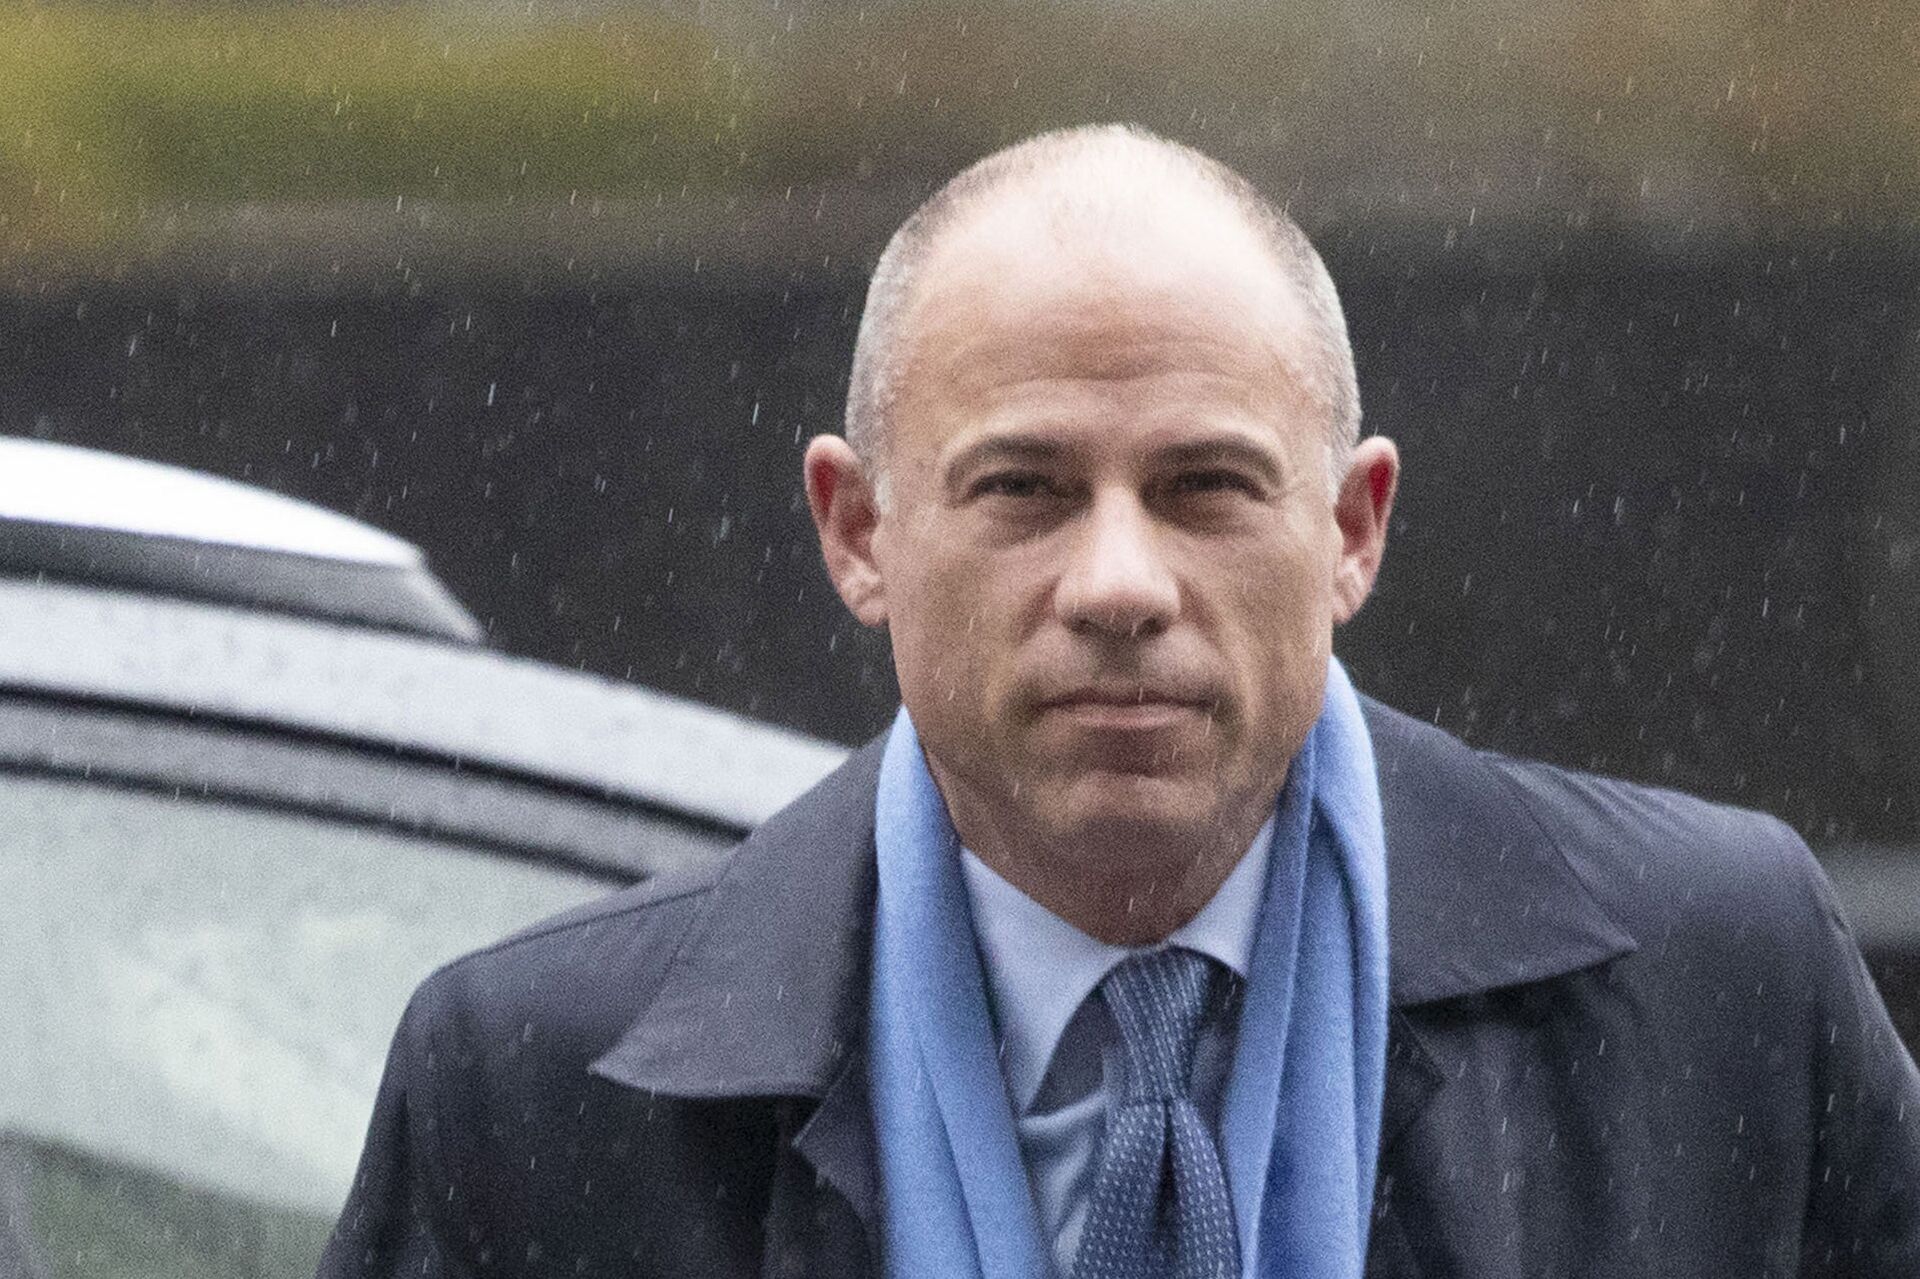  In this Dec. 17, 2019, file photo, attorney Michael Avenatti arrives at federal court in New York. A judge has set an April 2021 date for Avenatti to face trial on charges that he cheated ex-client Stormy Daniels out of proceeds from her book, Full Disclosure. Avenatti, who wrote the forward for the book, has pleaded not guilty - Sputnik International, 1920, 07.09.2021